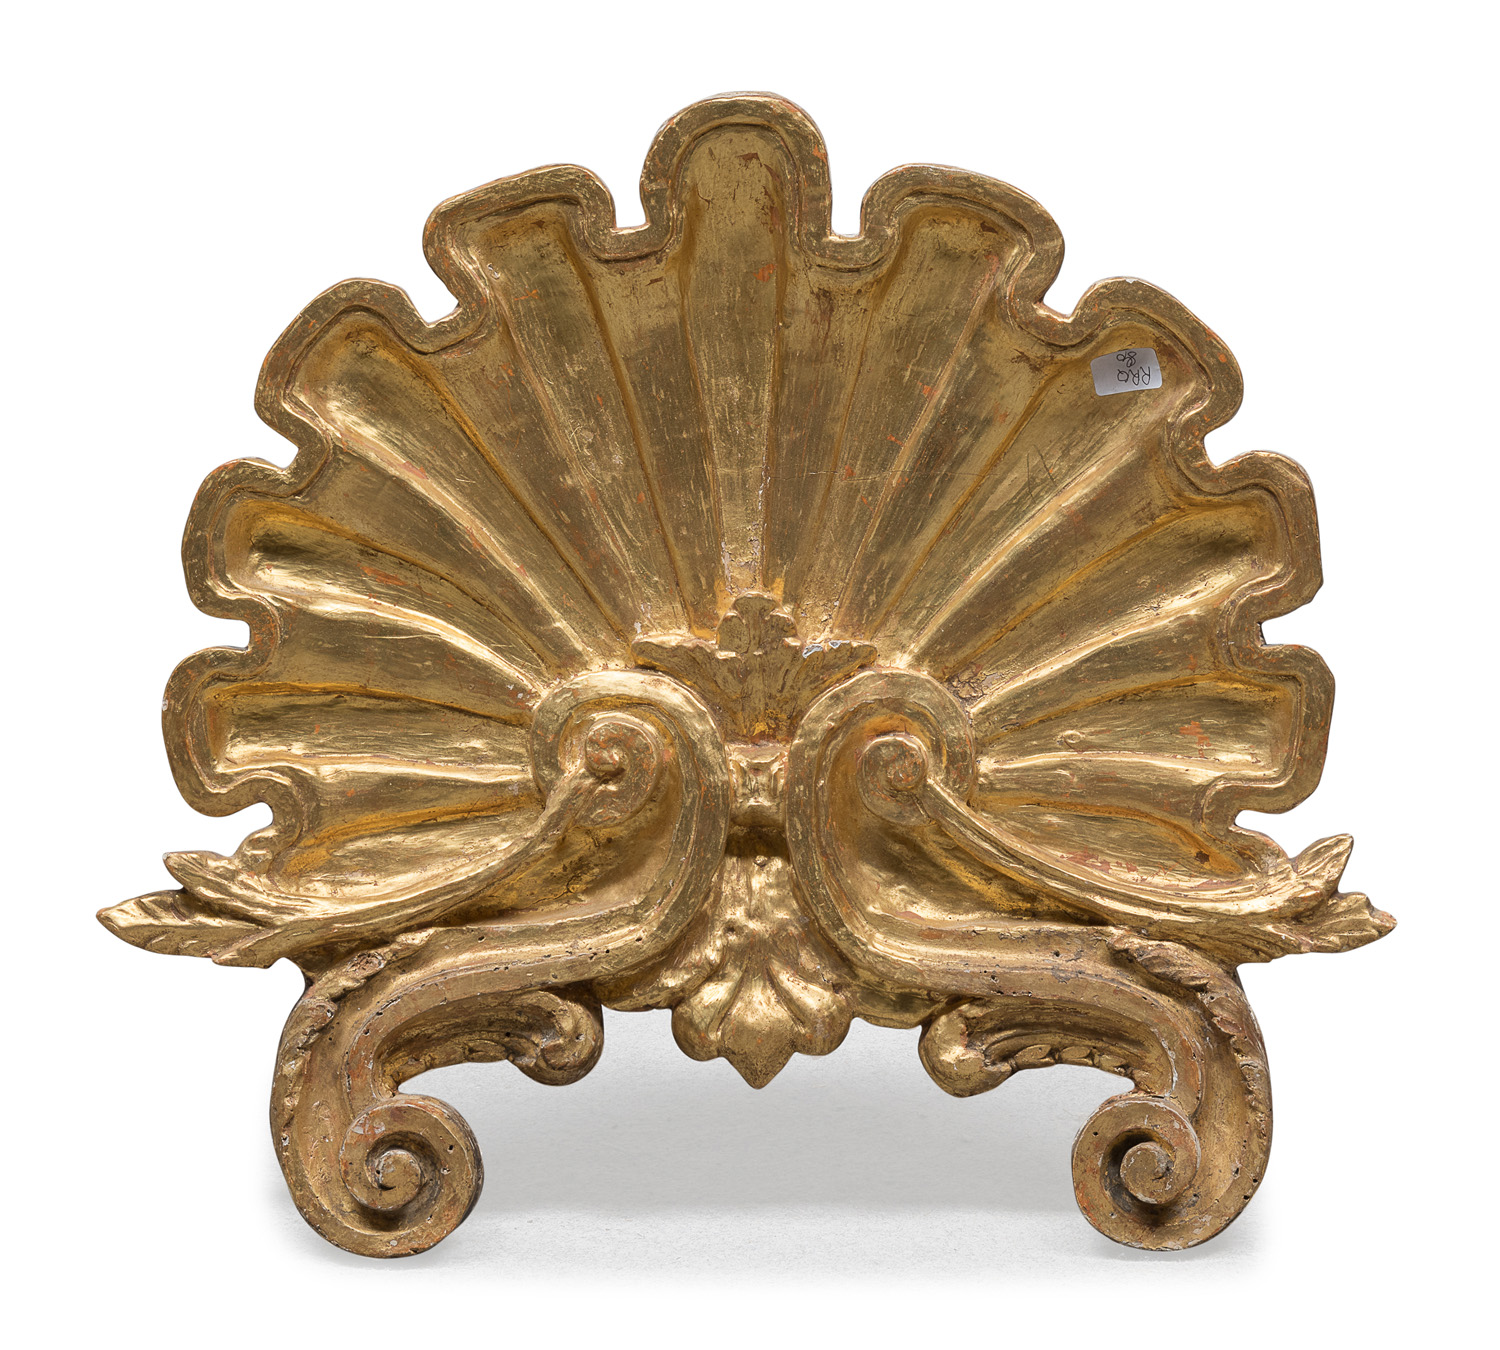 ROCCAILLES FRIEZE IN GILTWOOD 17th CENTURY